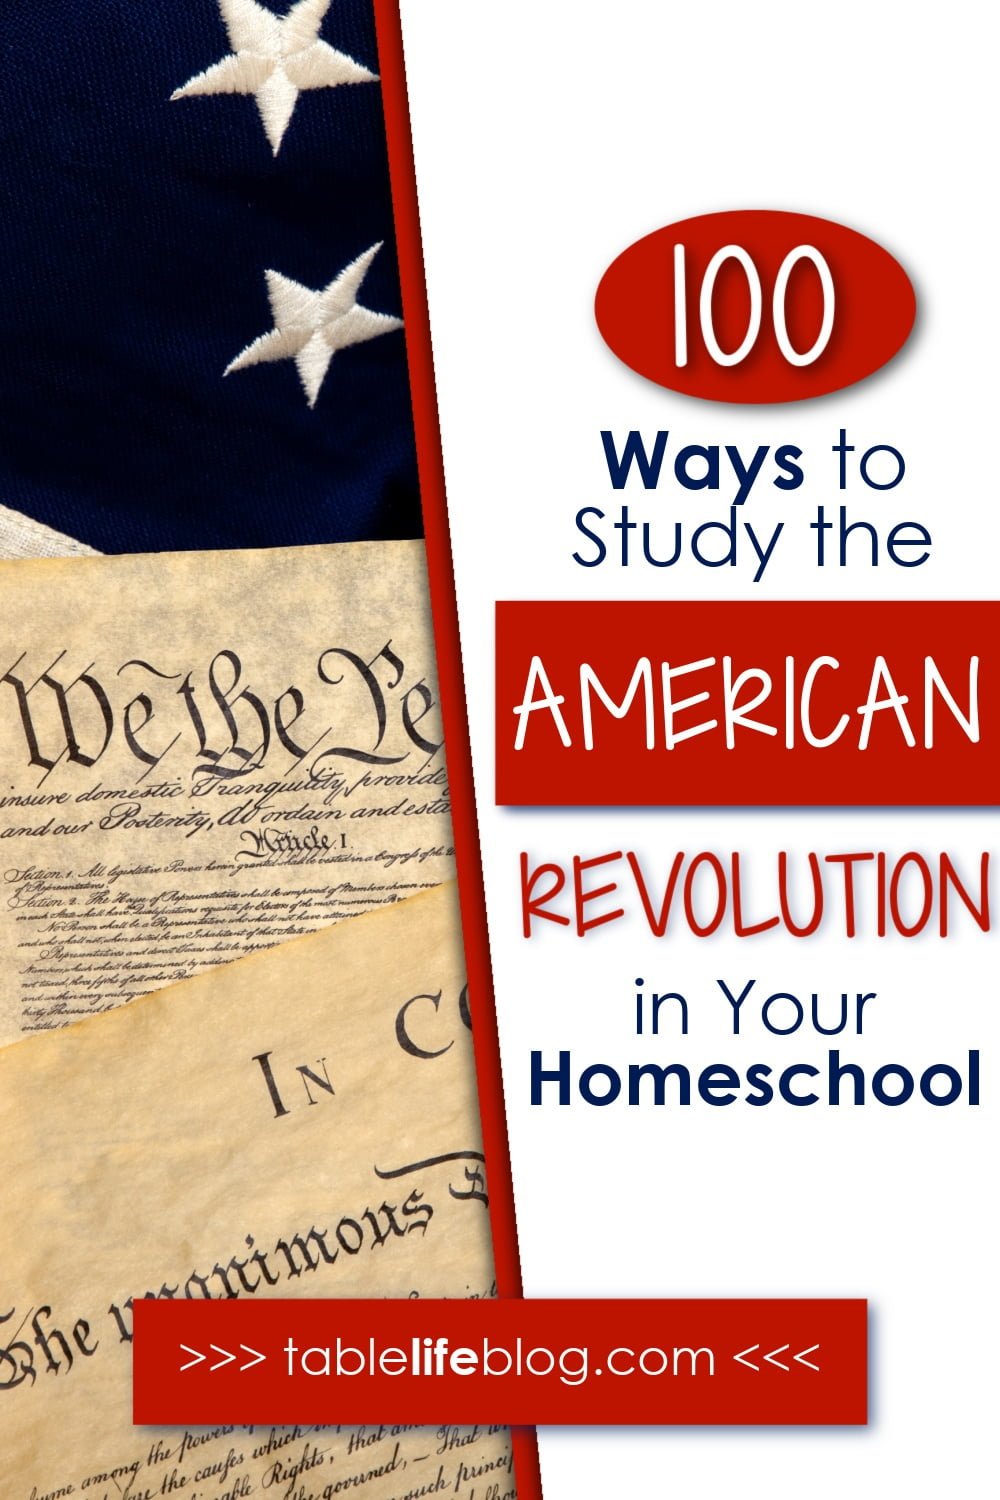 Planning to cover the American Revolution in your homeschool? We've got a great list of 100 resources to make it happen.